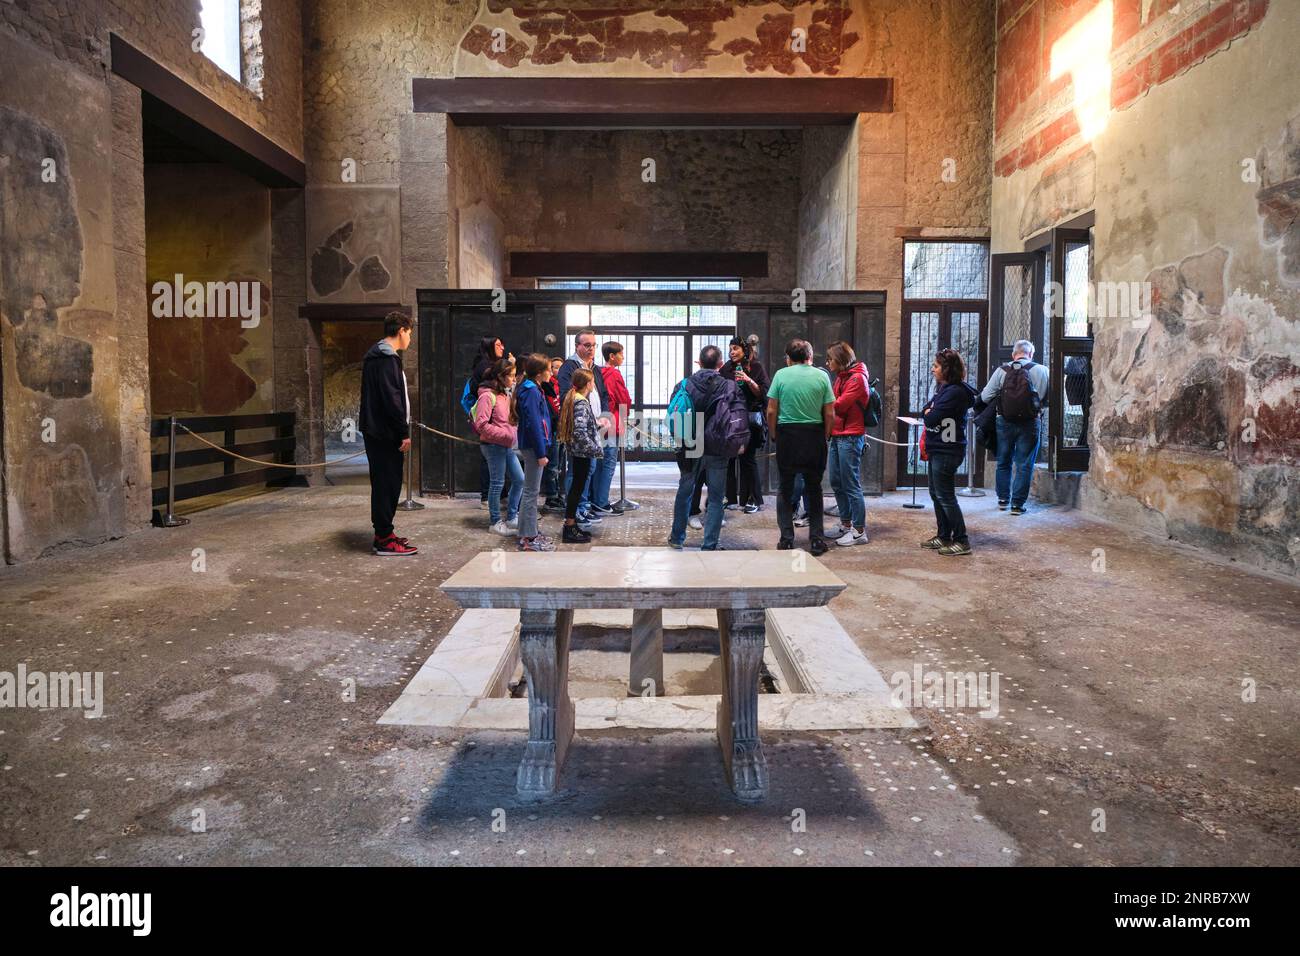 Tourists, visitors inspecting the big doors, still on metal runners. At the House of the Wooden Partition. At the Roman ruin archeological town, city Stock Photo